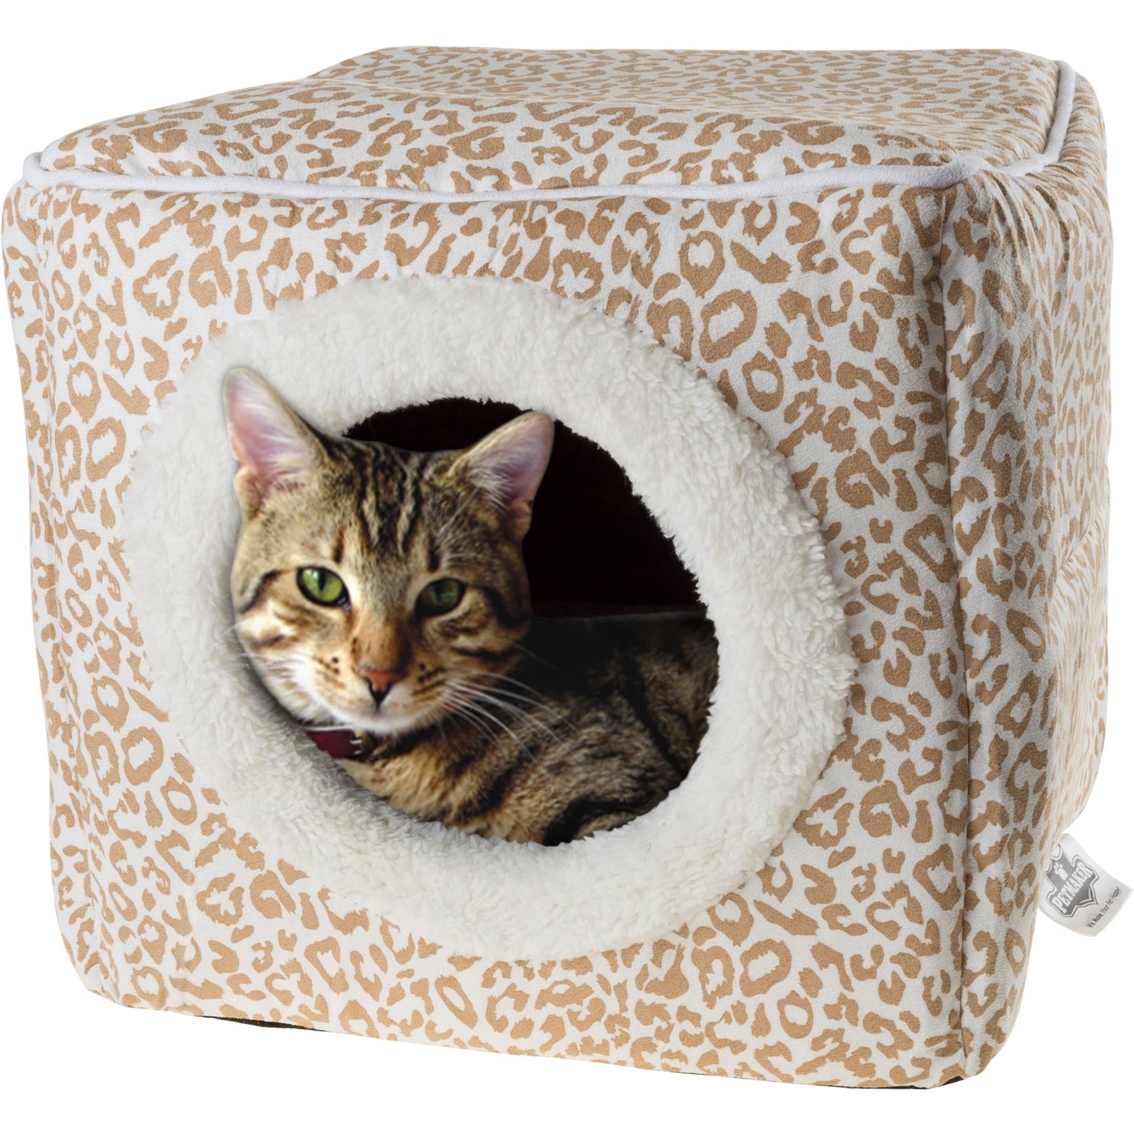 Petmaker Cave Cat Bed with Cushion - Image 2 of 3